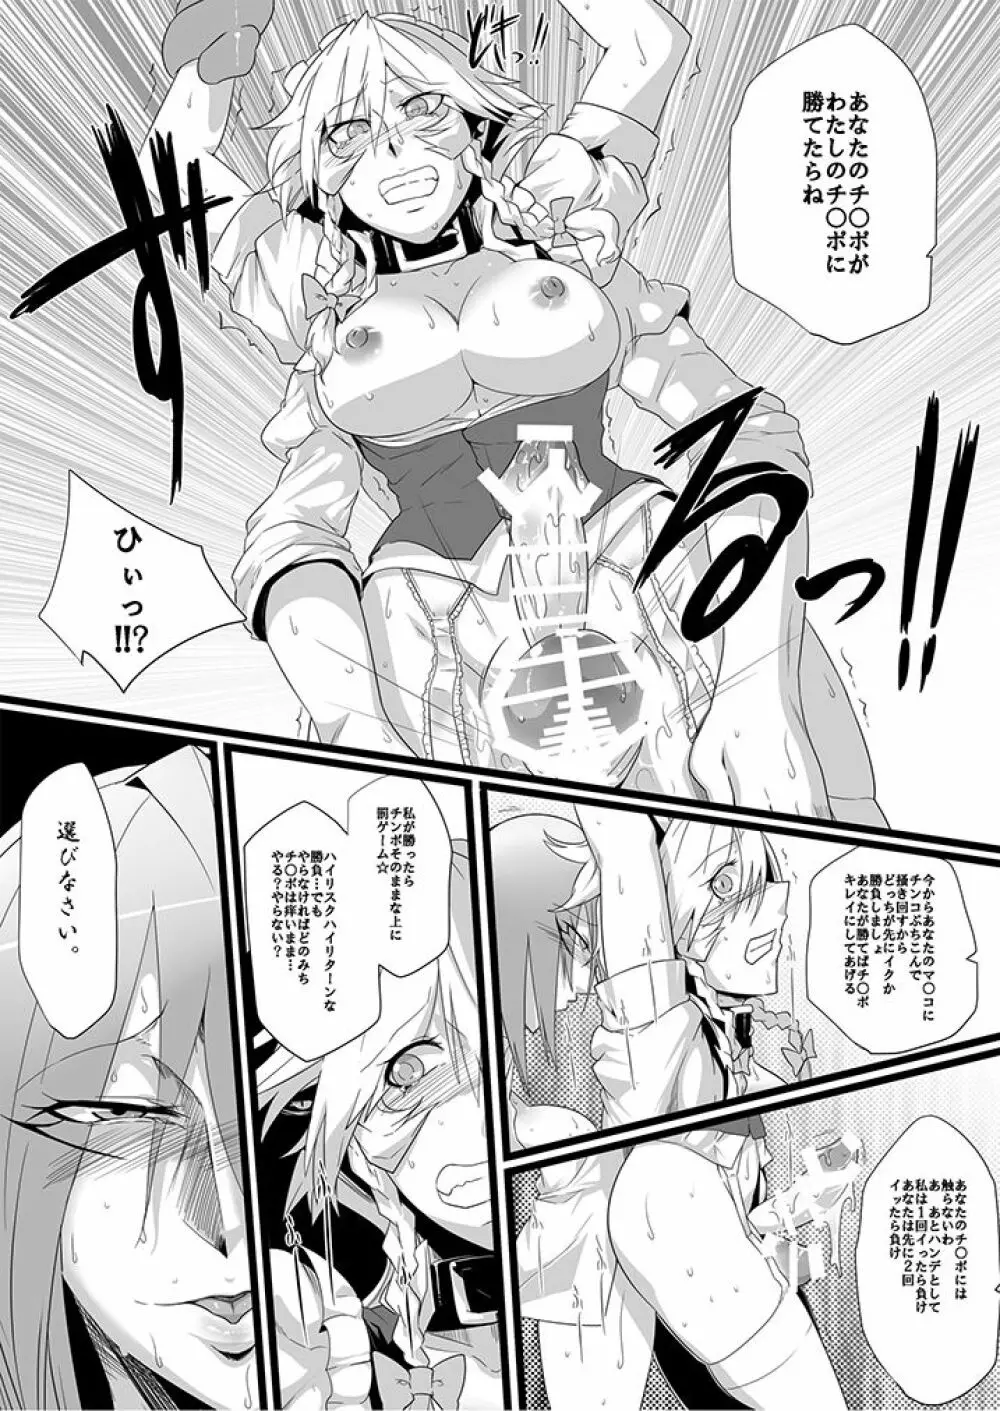 SAKUYA MAID in HEAVEN/ALL IN 1 - page224